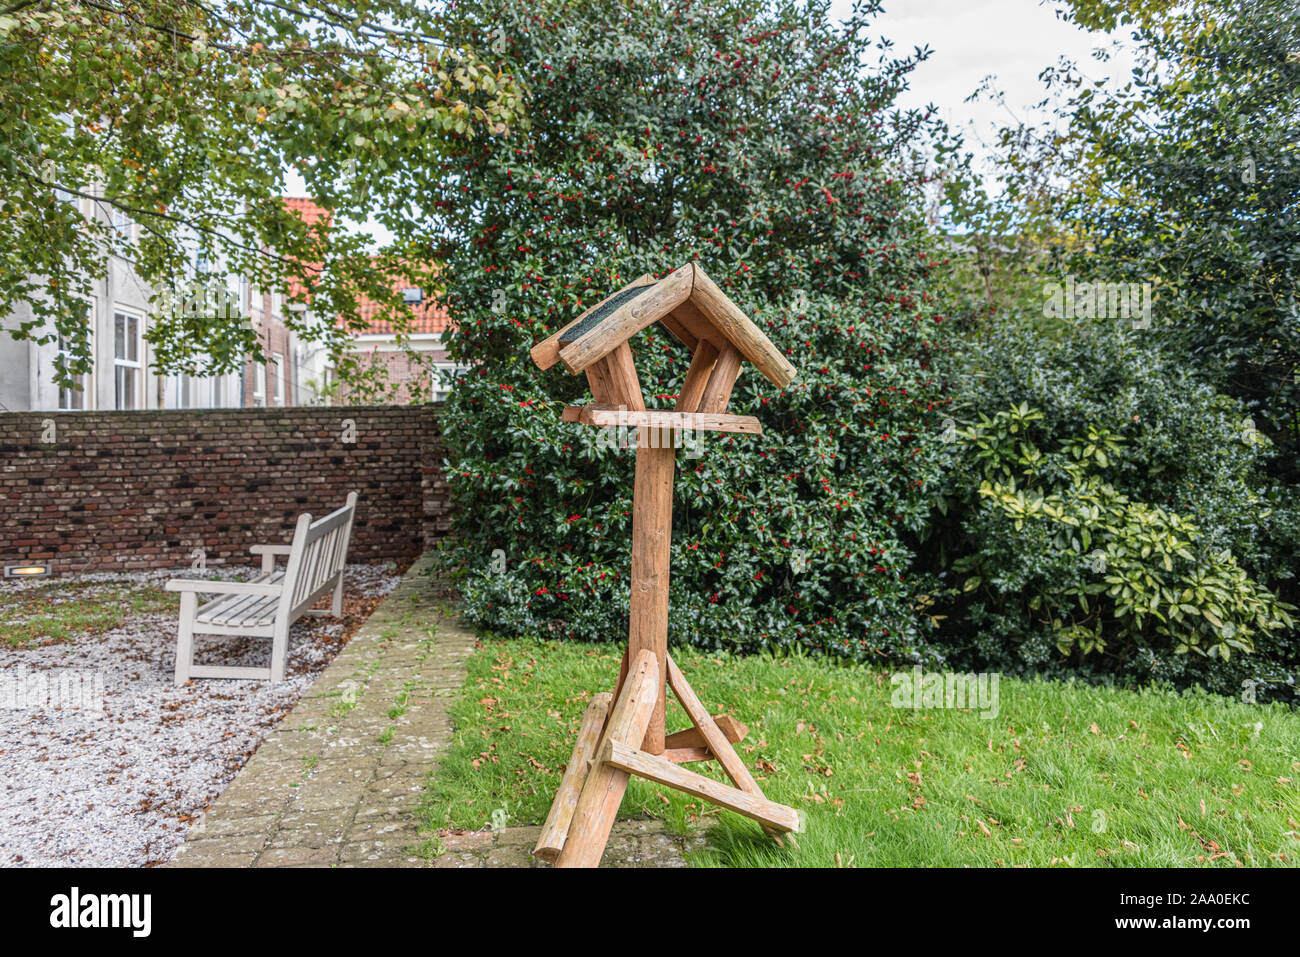 new birdhouse for feeding the birds mounted on a wooden pole Stock Photo